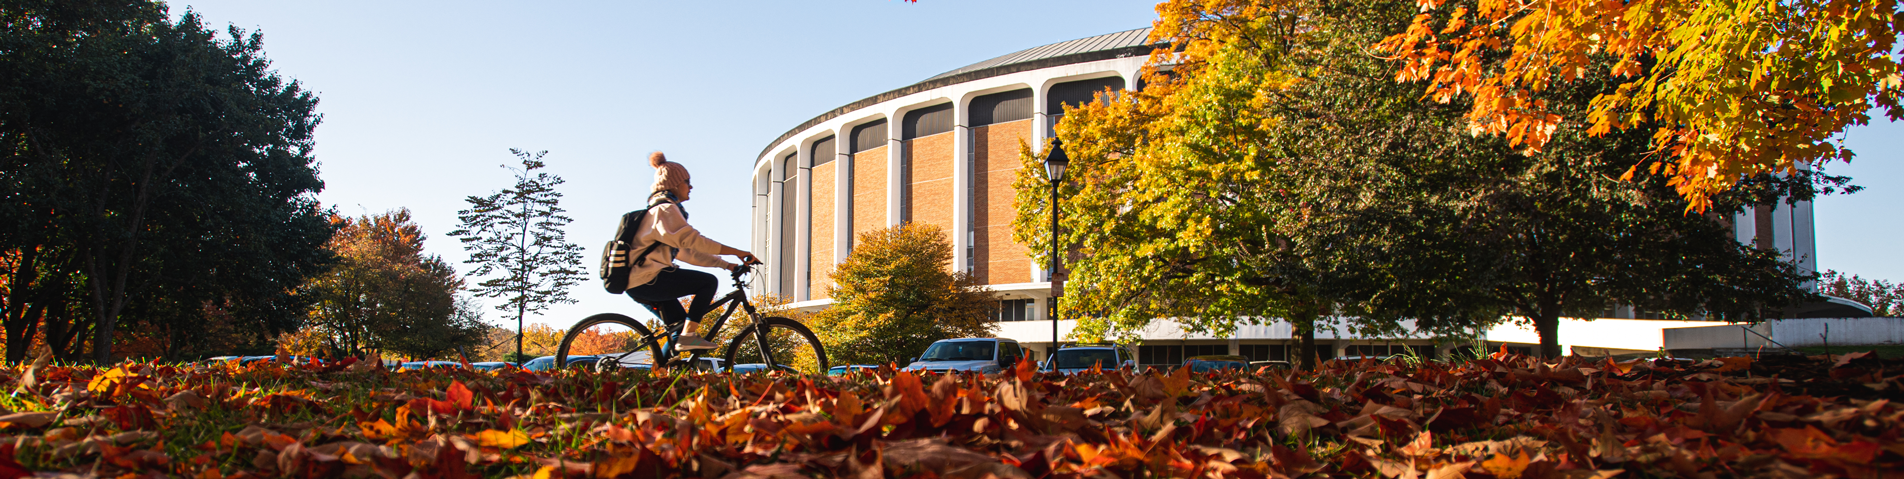 student riding a bike in the fall on campus 